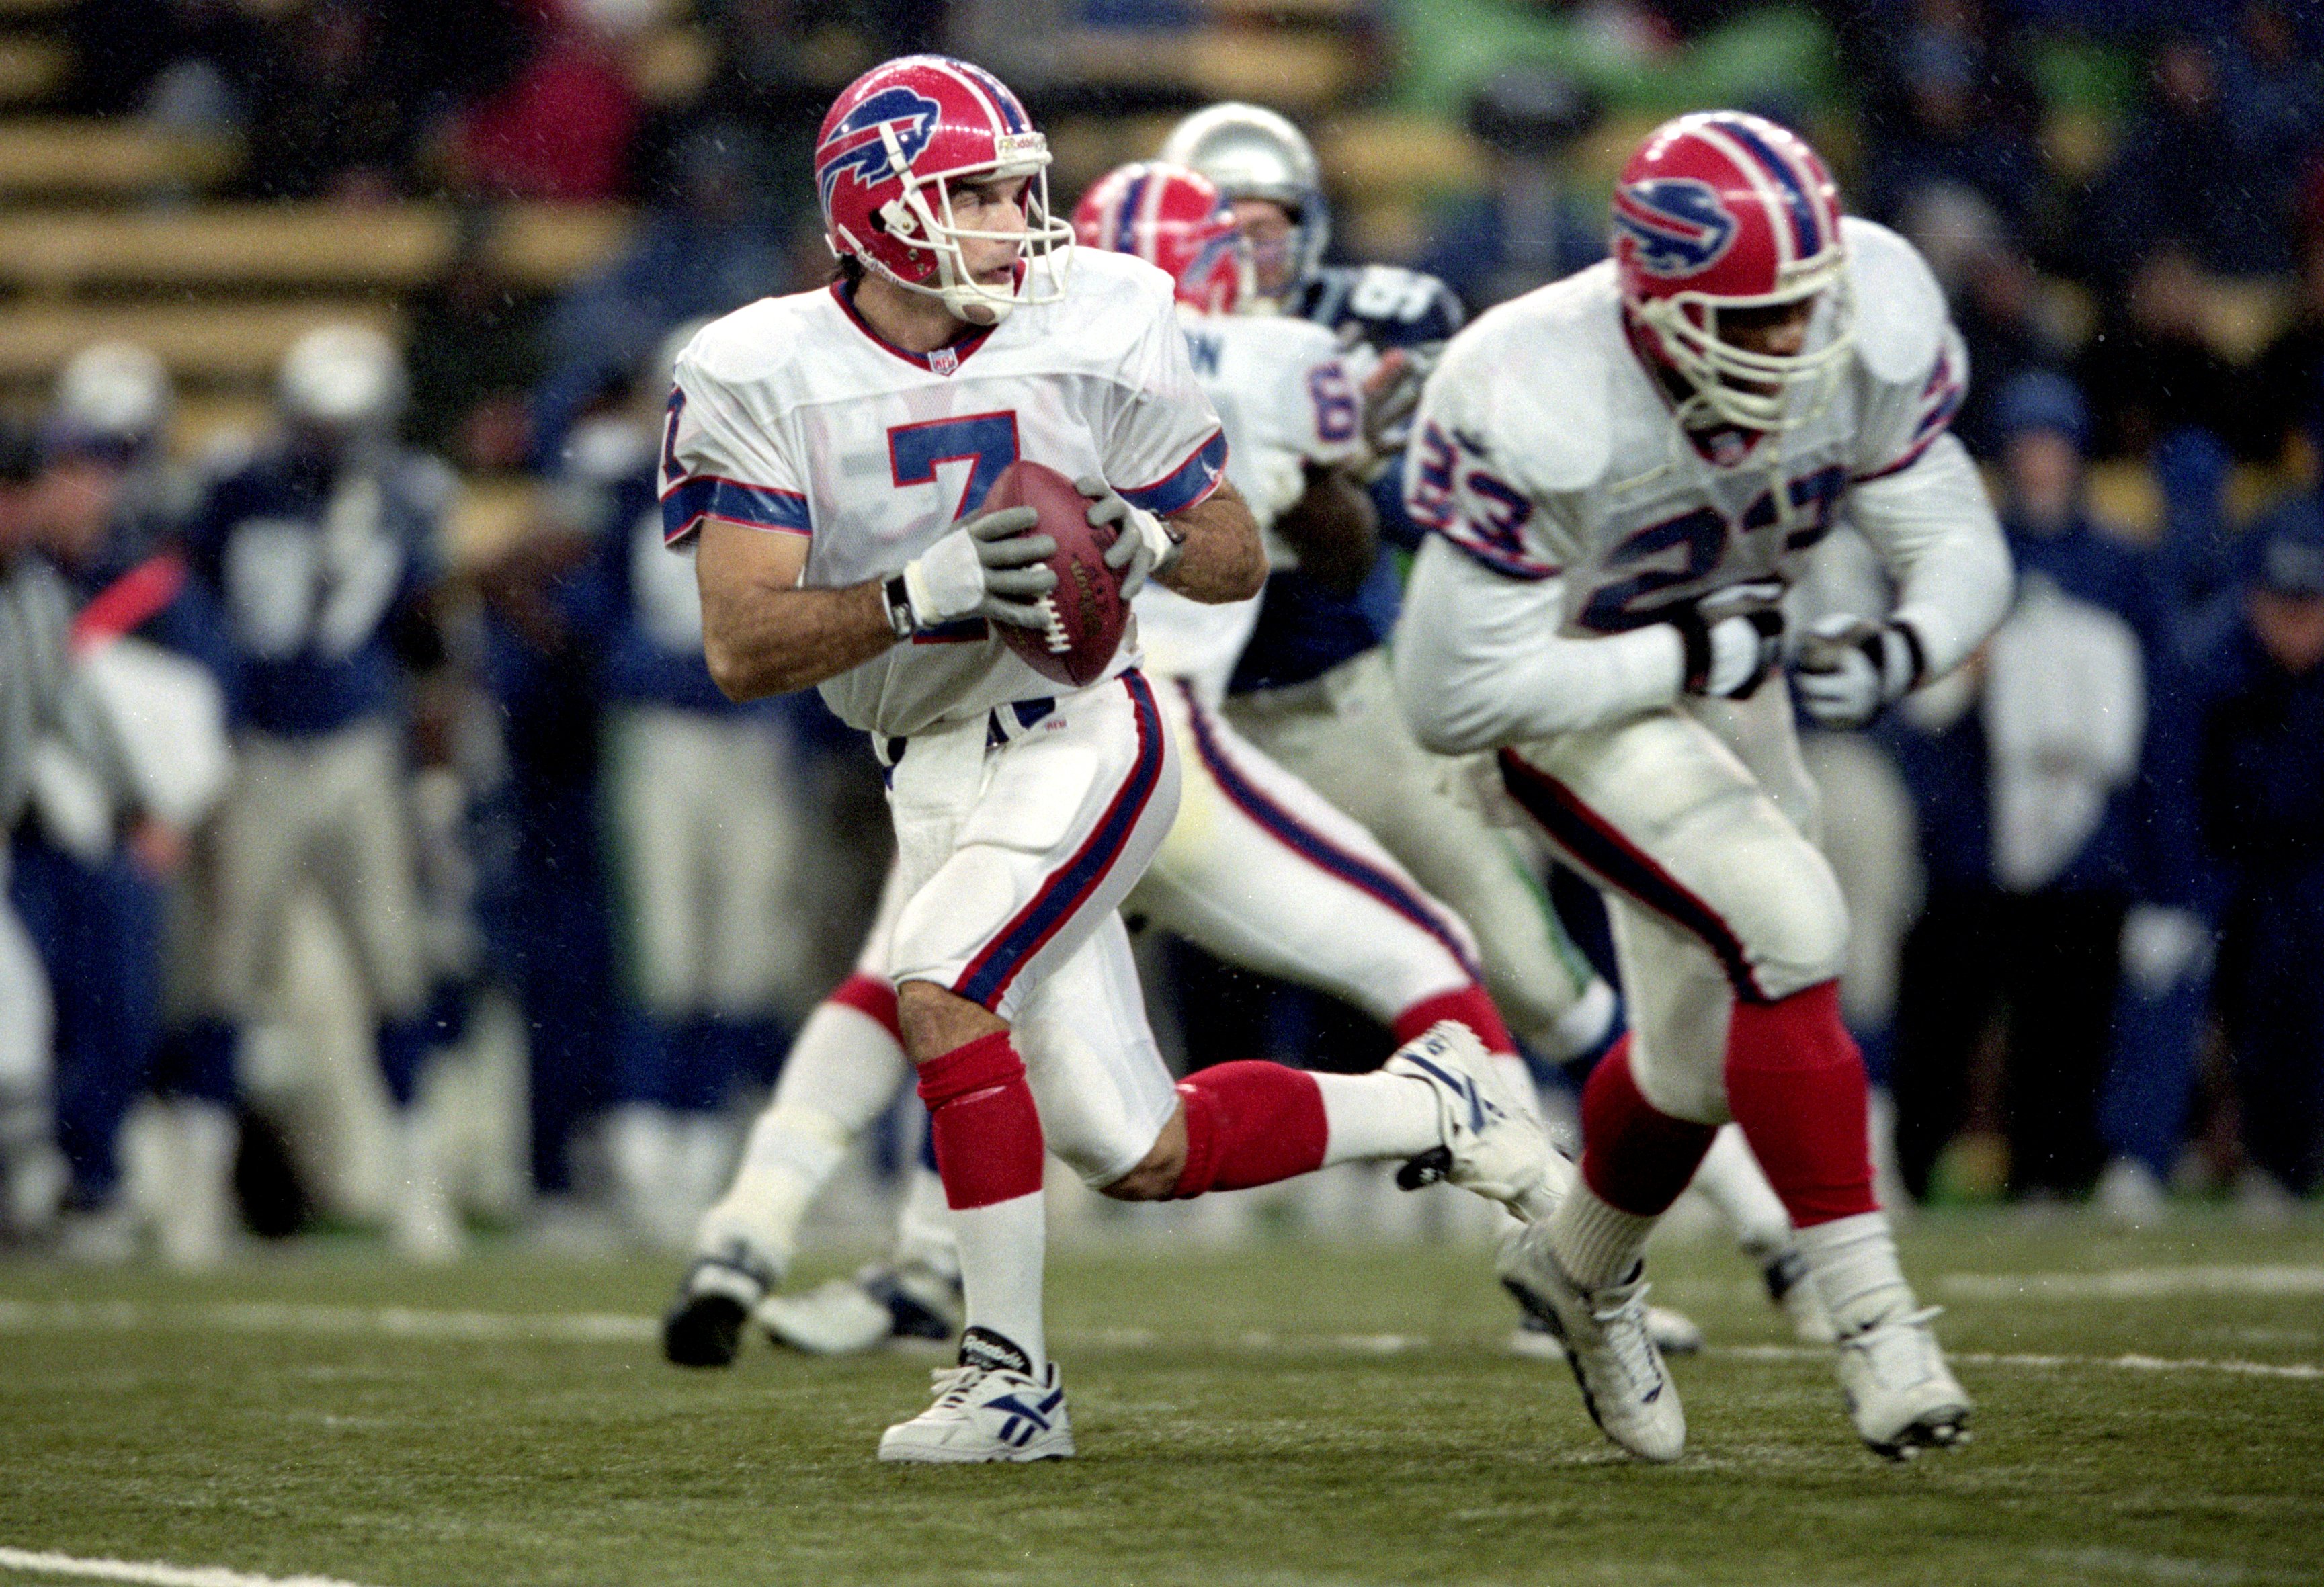 What occurred on the Music City Miracle 20 years ago?